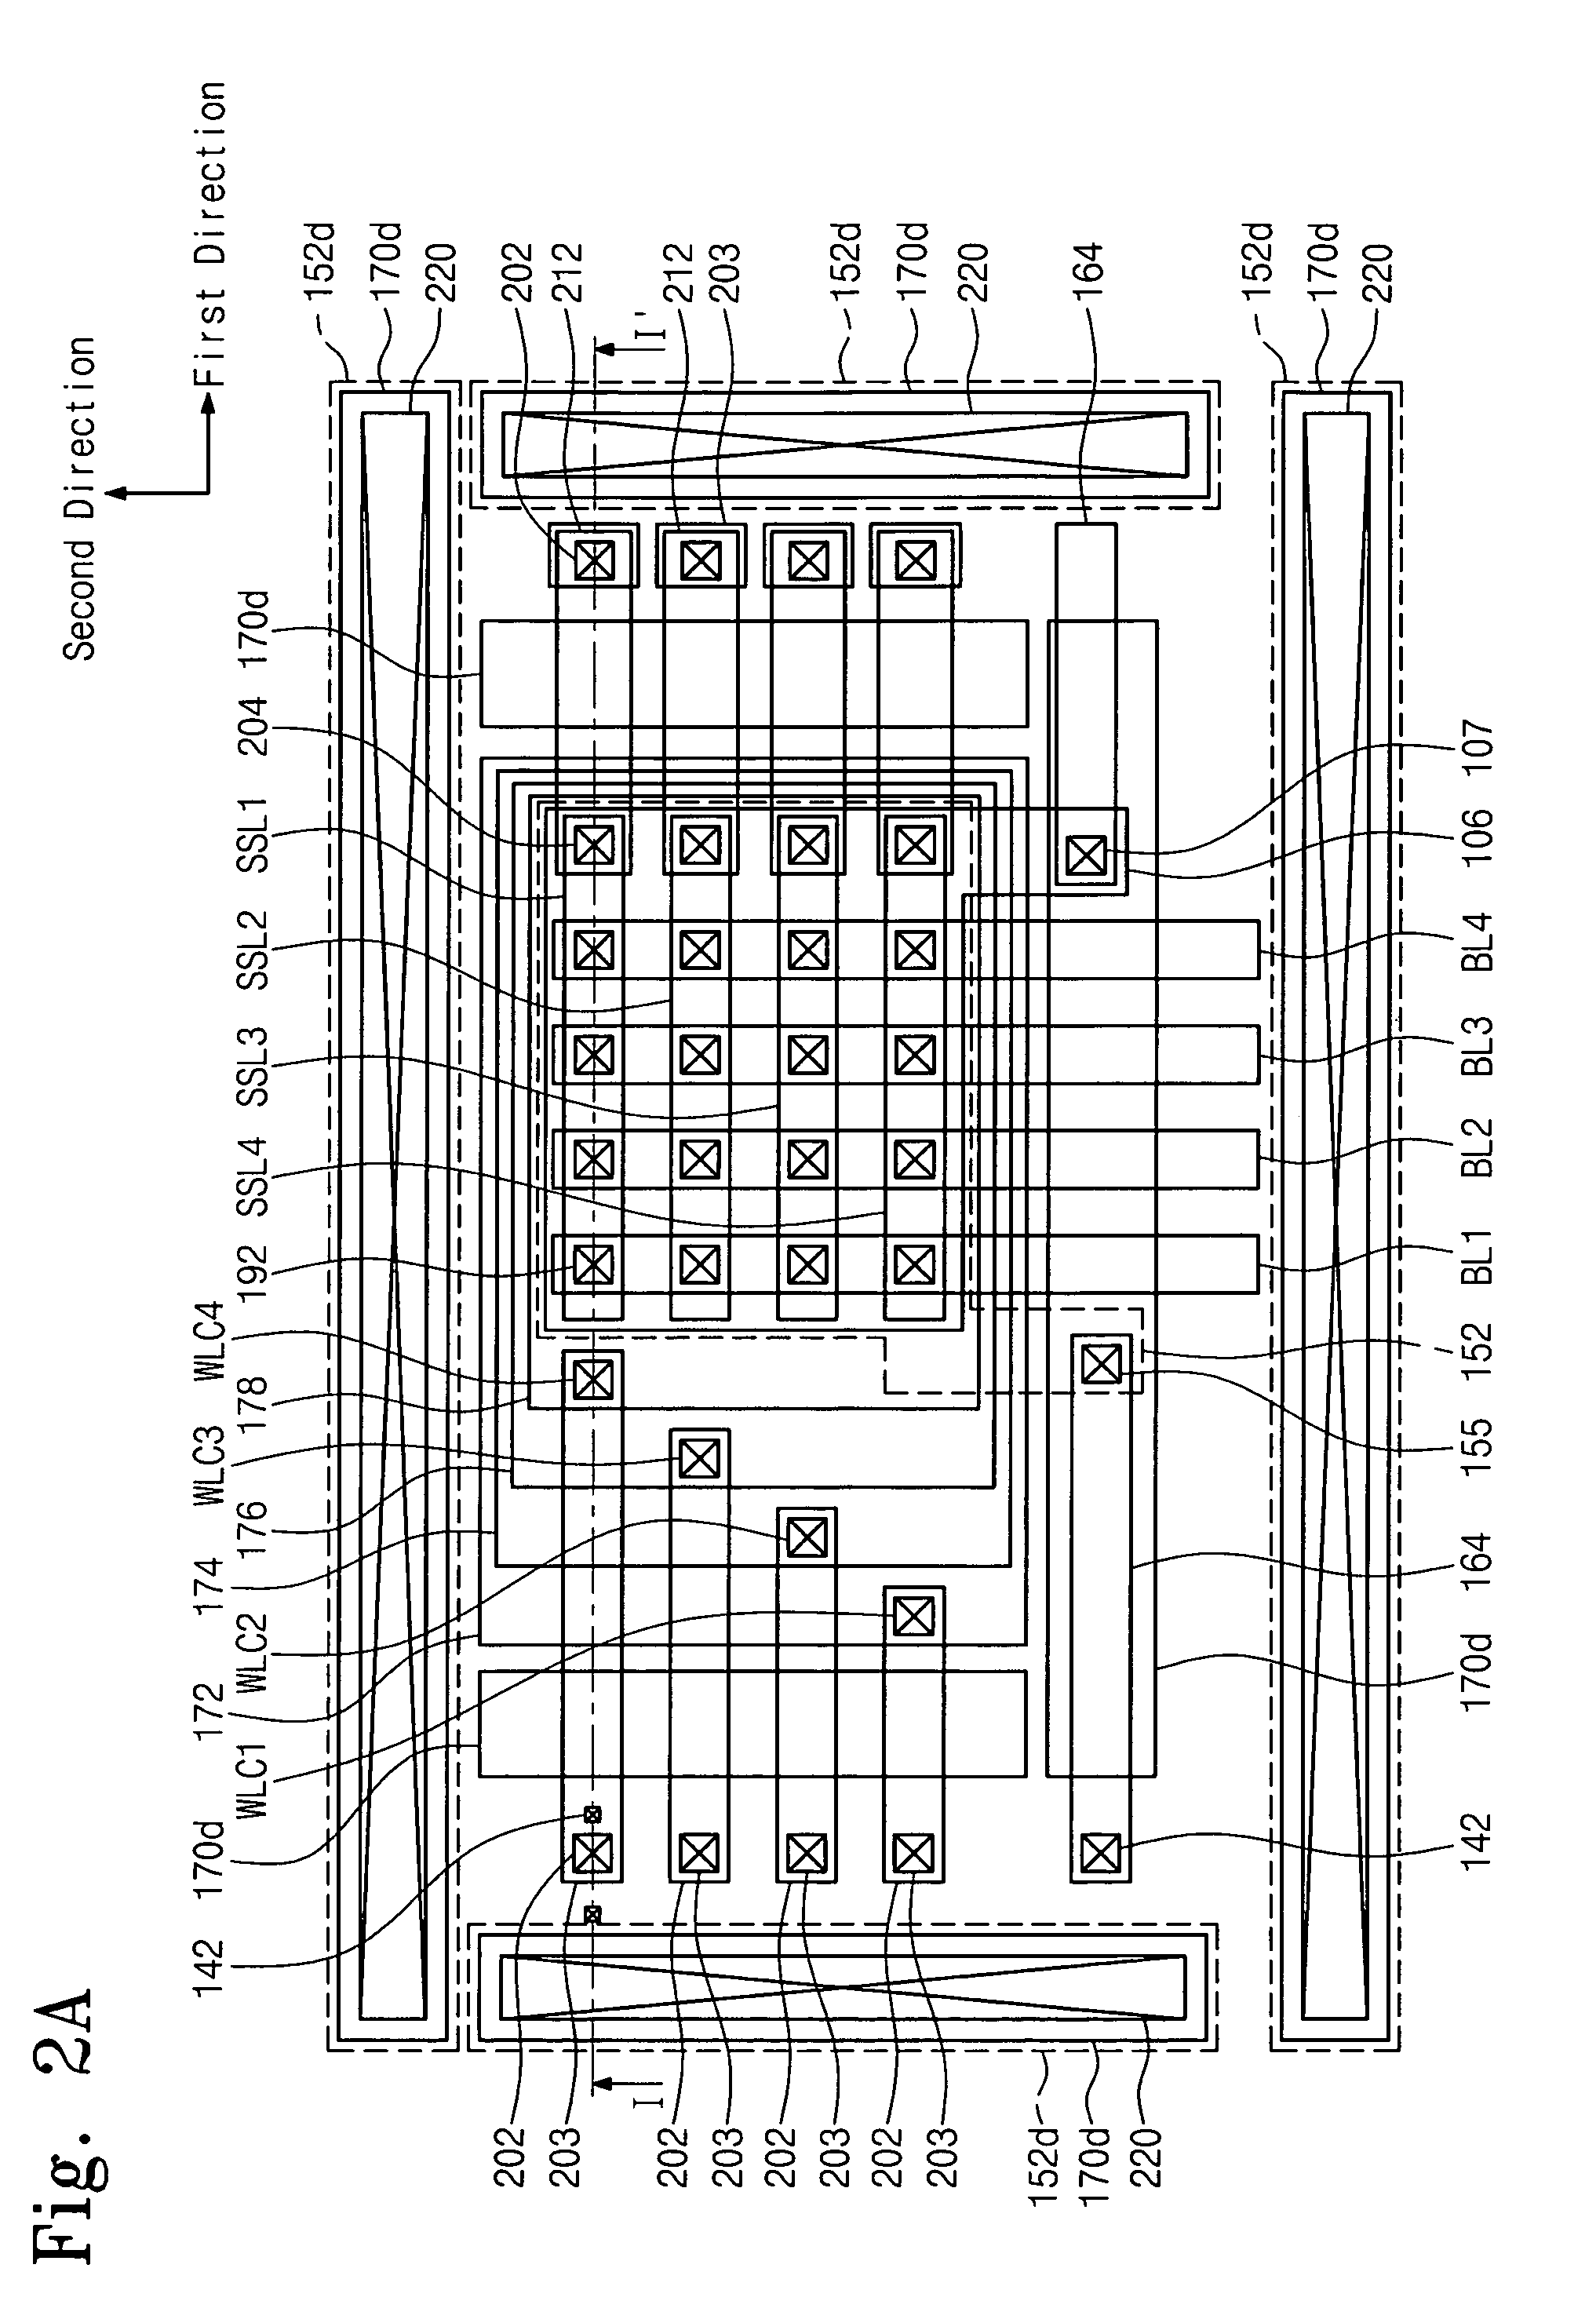 Vertical-type semiconductor device and method of manufacturing the same